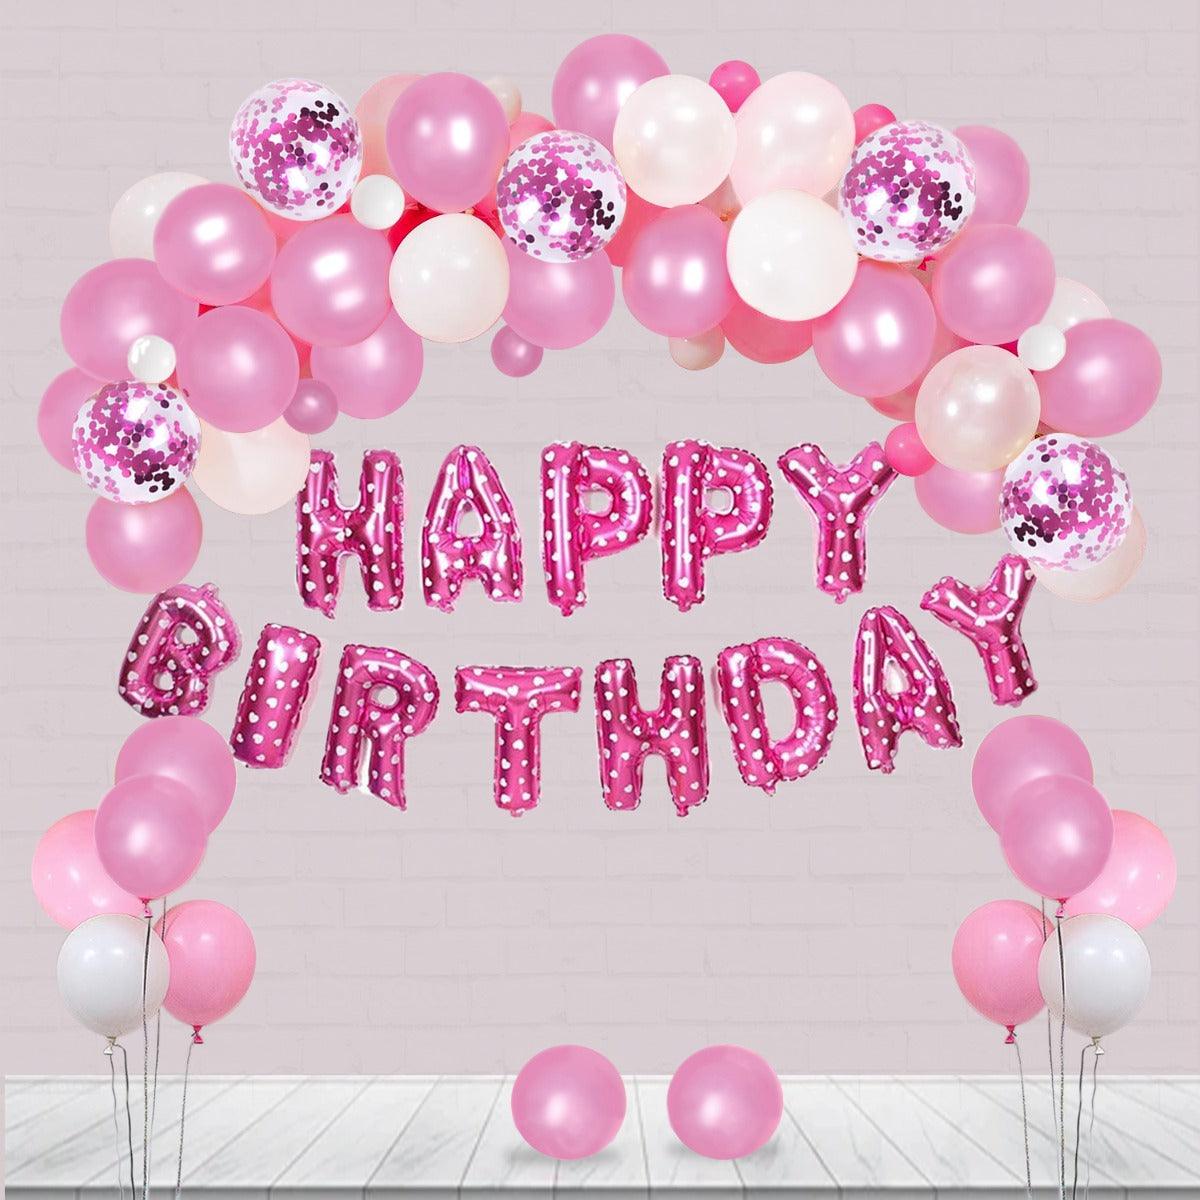 PartyCorp Happy Birthday Decoration Kit Combo 40 Pcs - Pink & White Latex & Pink Confetti Balloon, Pink Happy Birthday Foil Banner